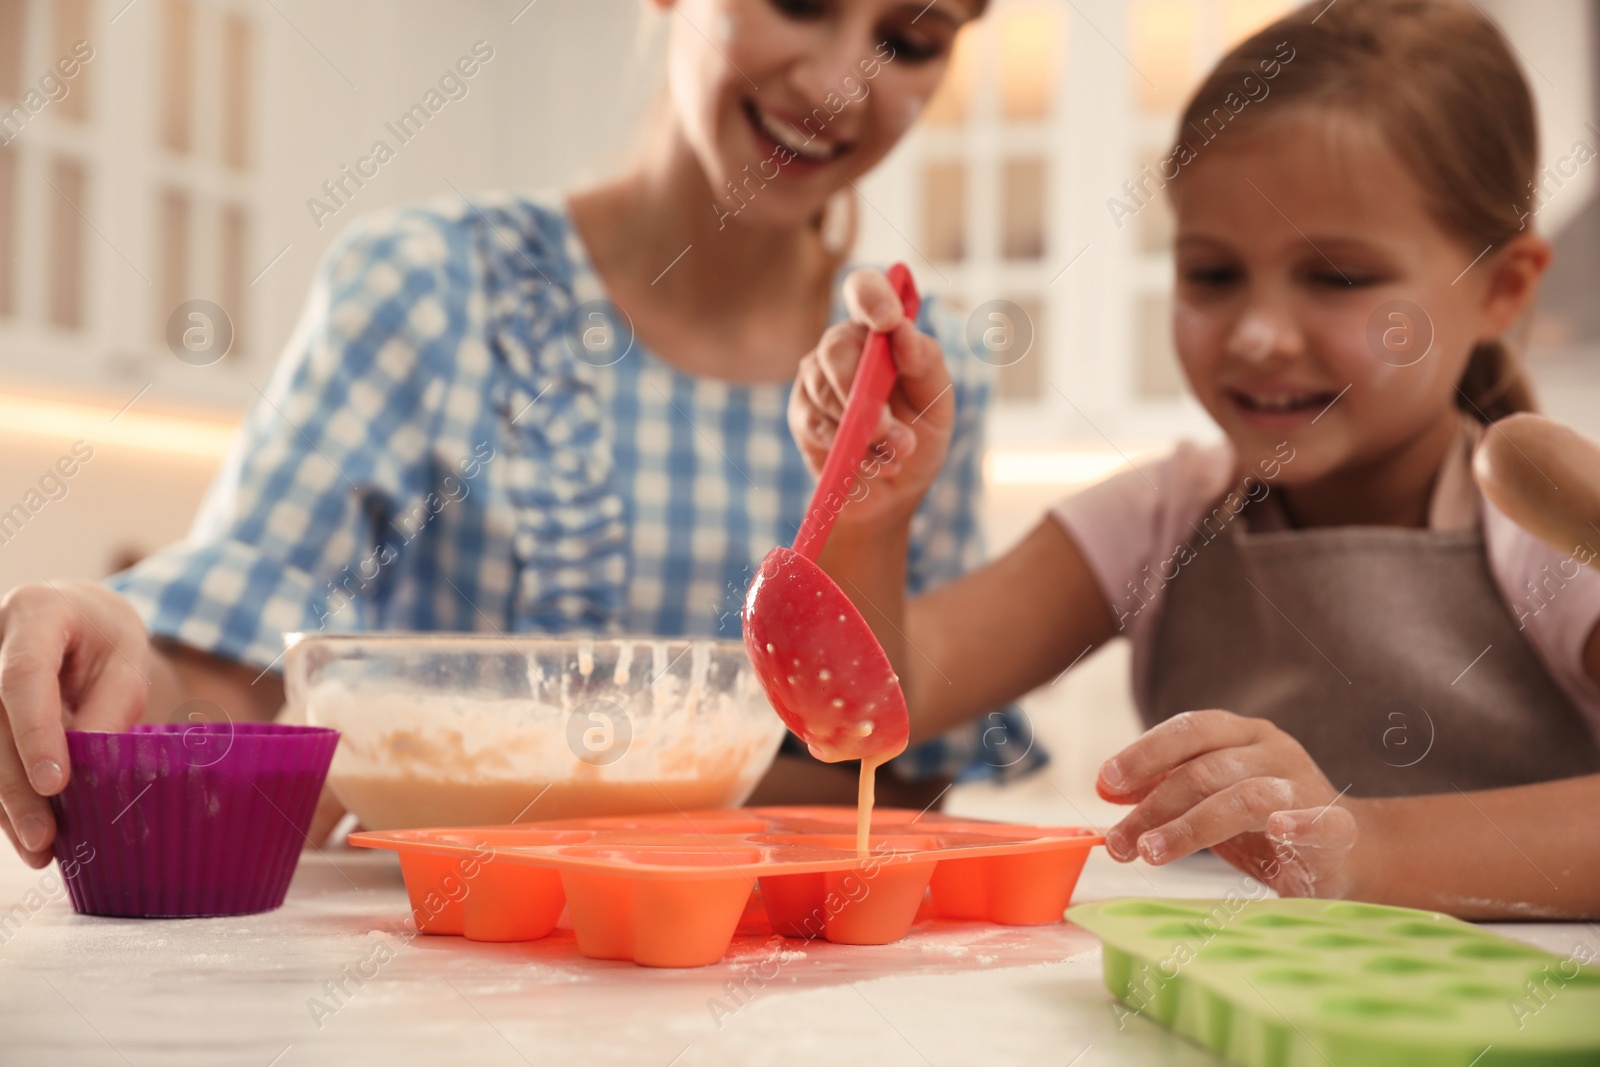 Photo of Mother and daughter making cupcakes together in kitchen, focus on ladle